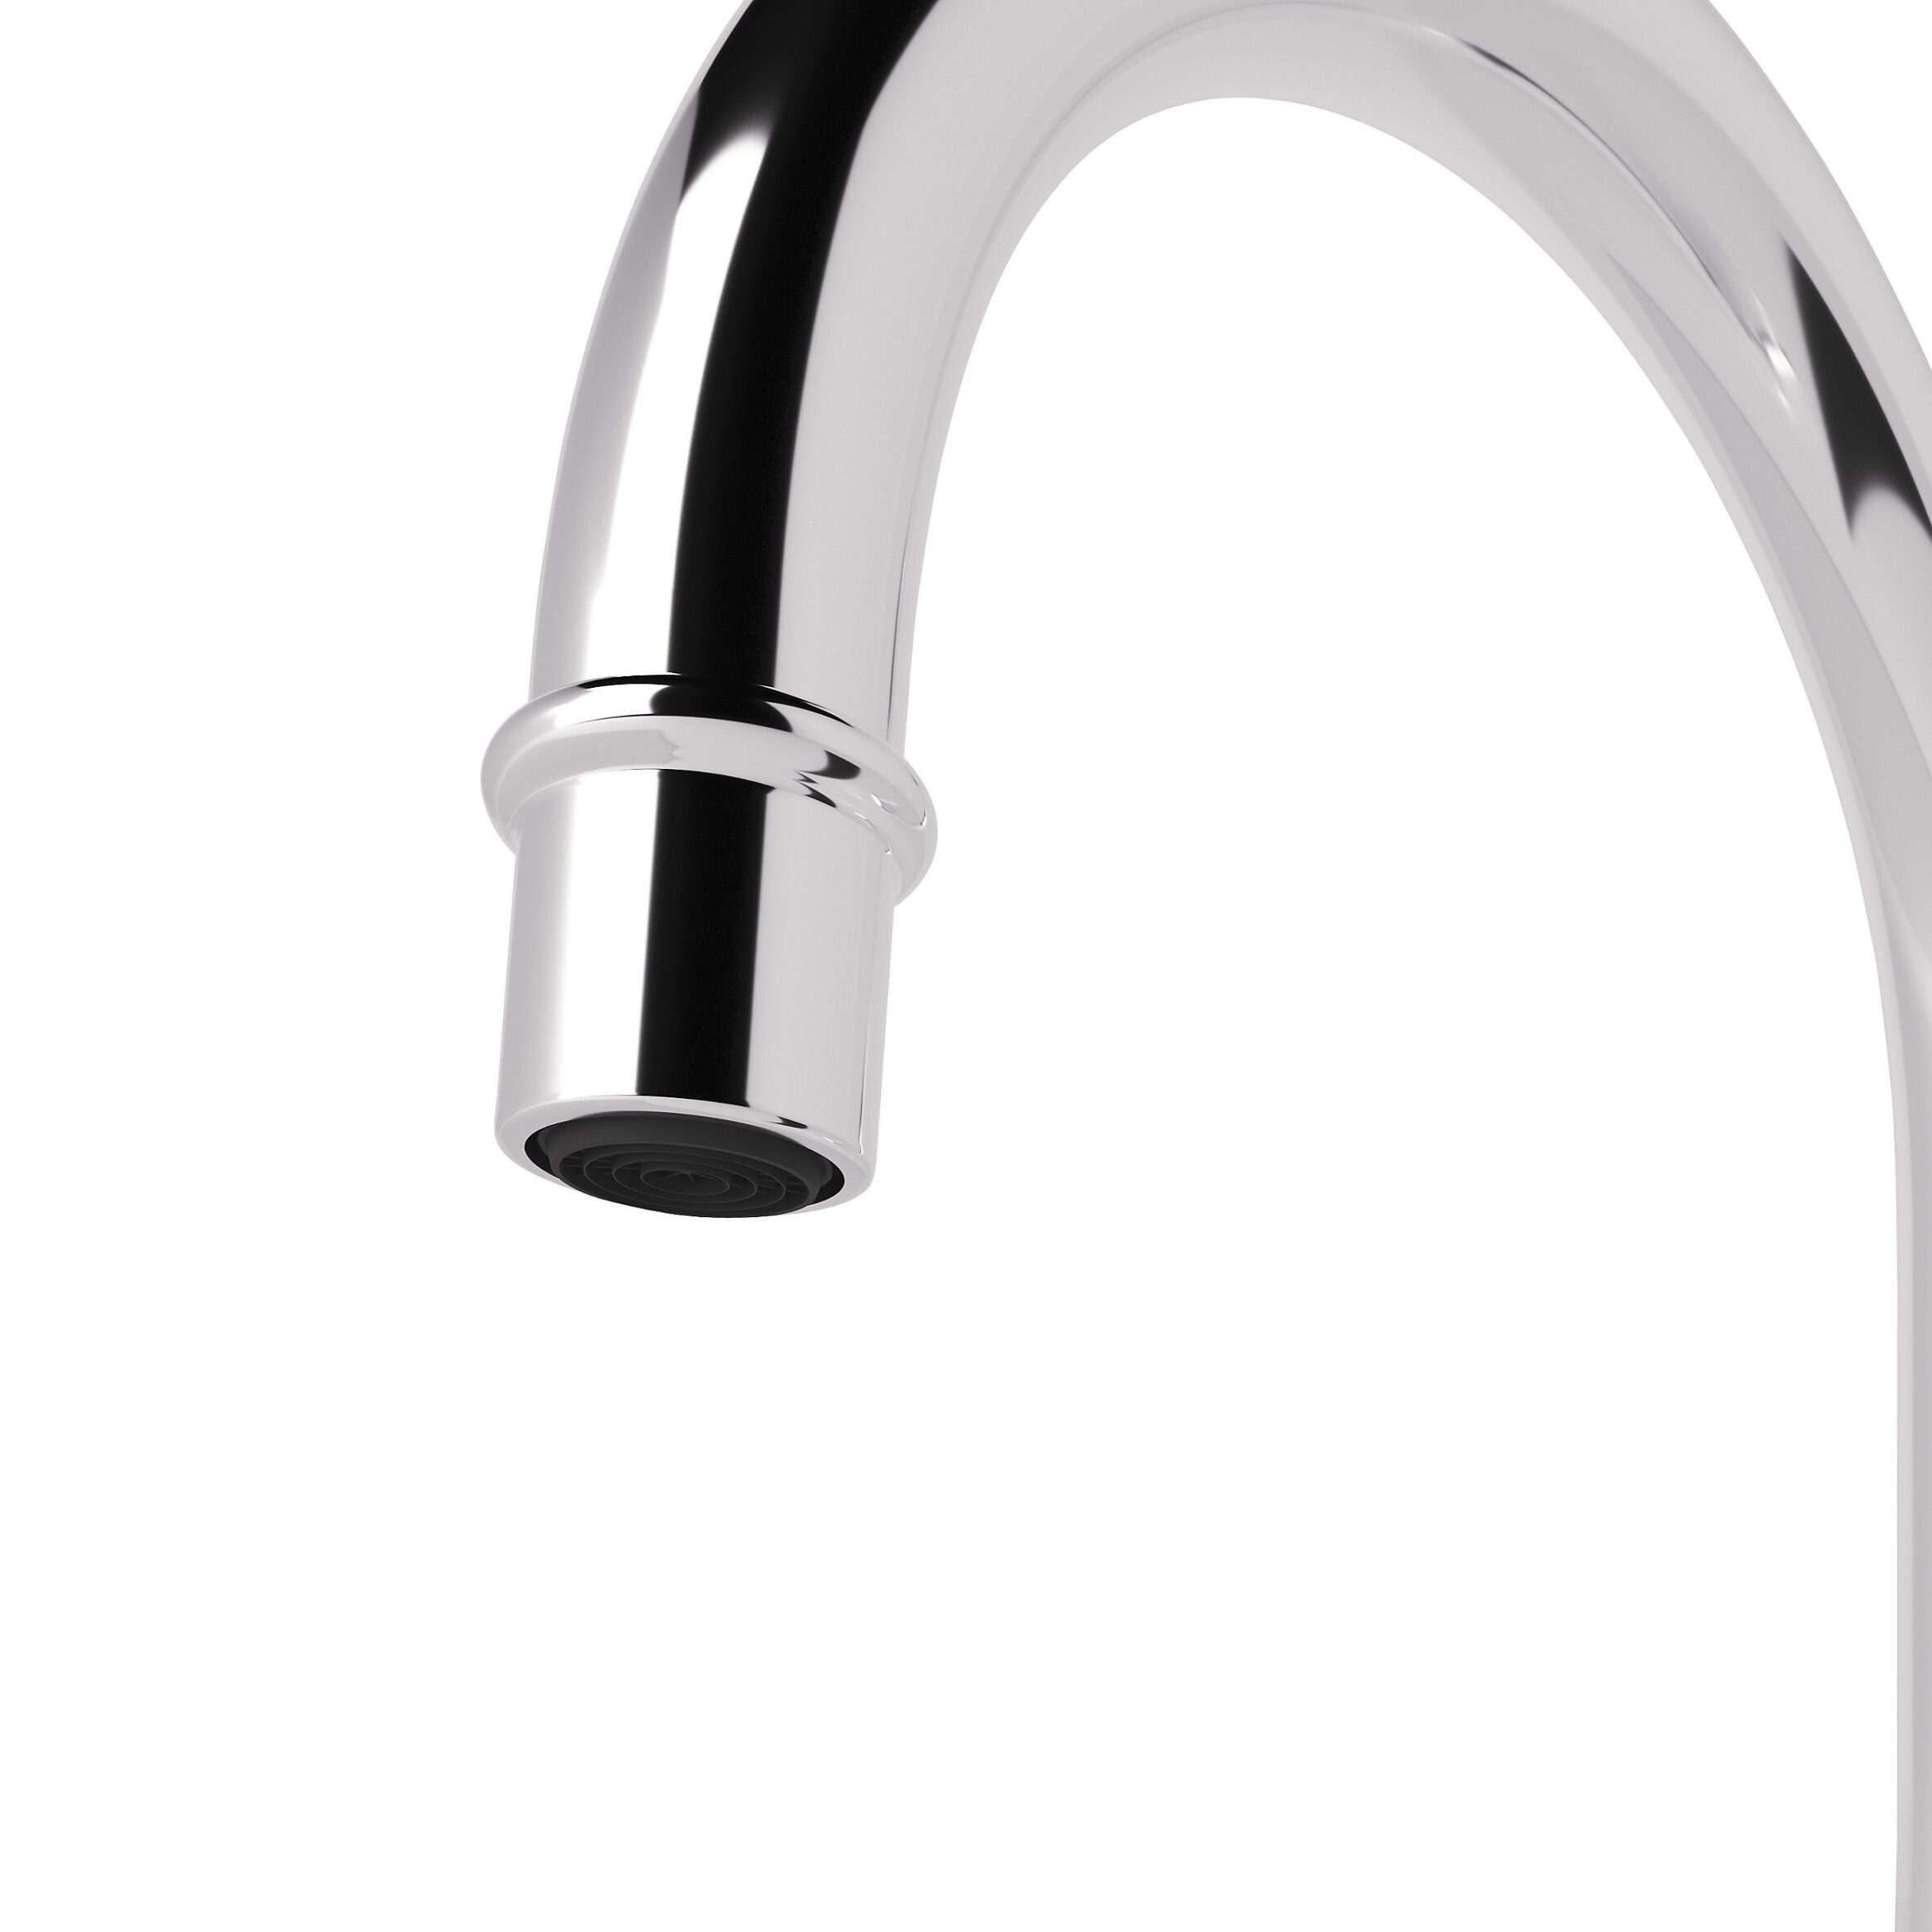 GoodHome Filbert Chrome effect Kitchen Side lever Mixer tap Ceramic Handle 6018